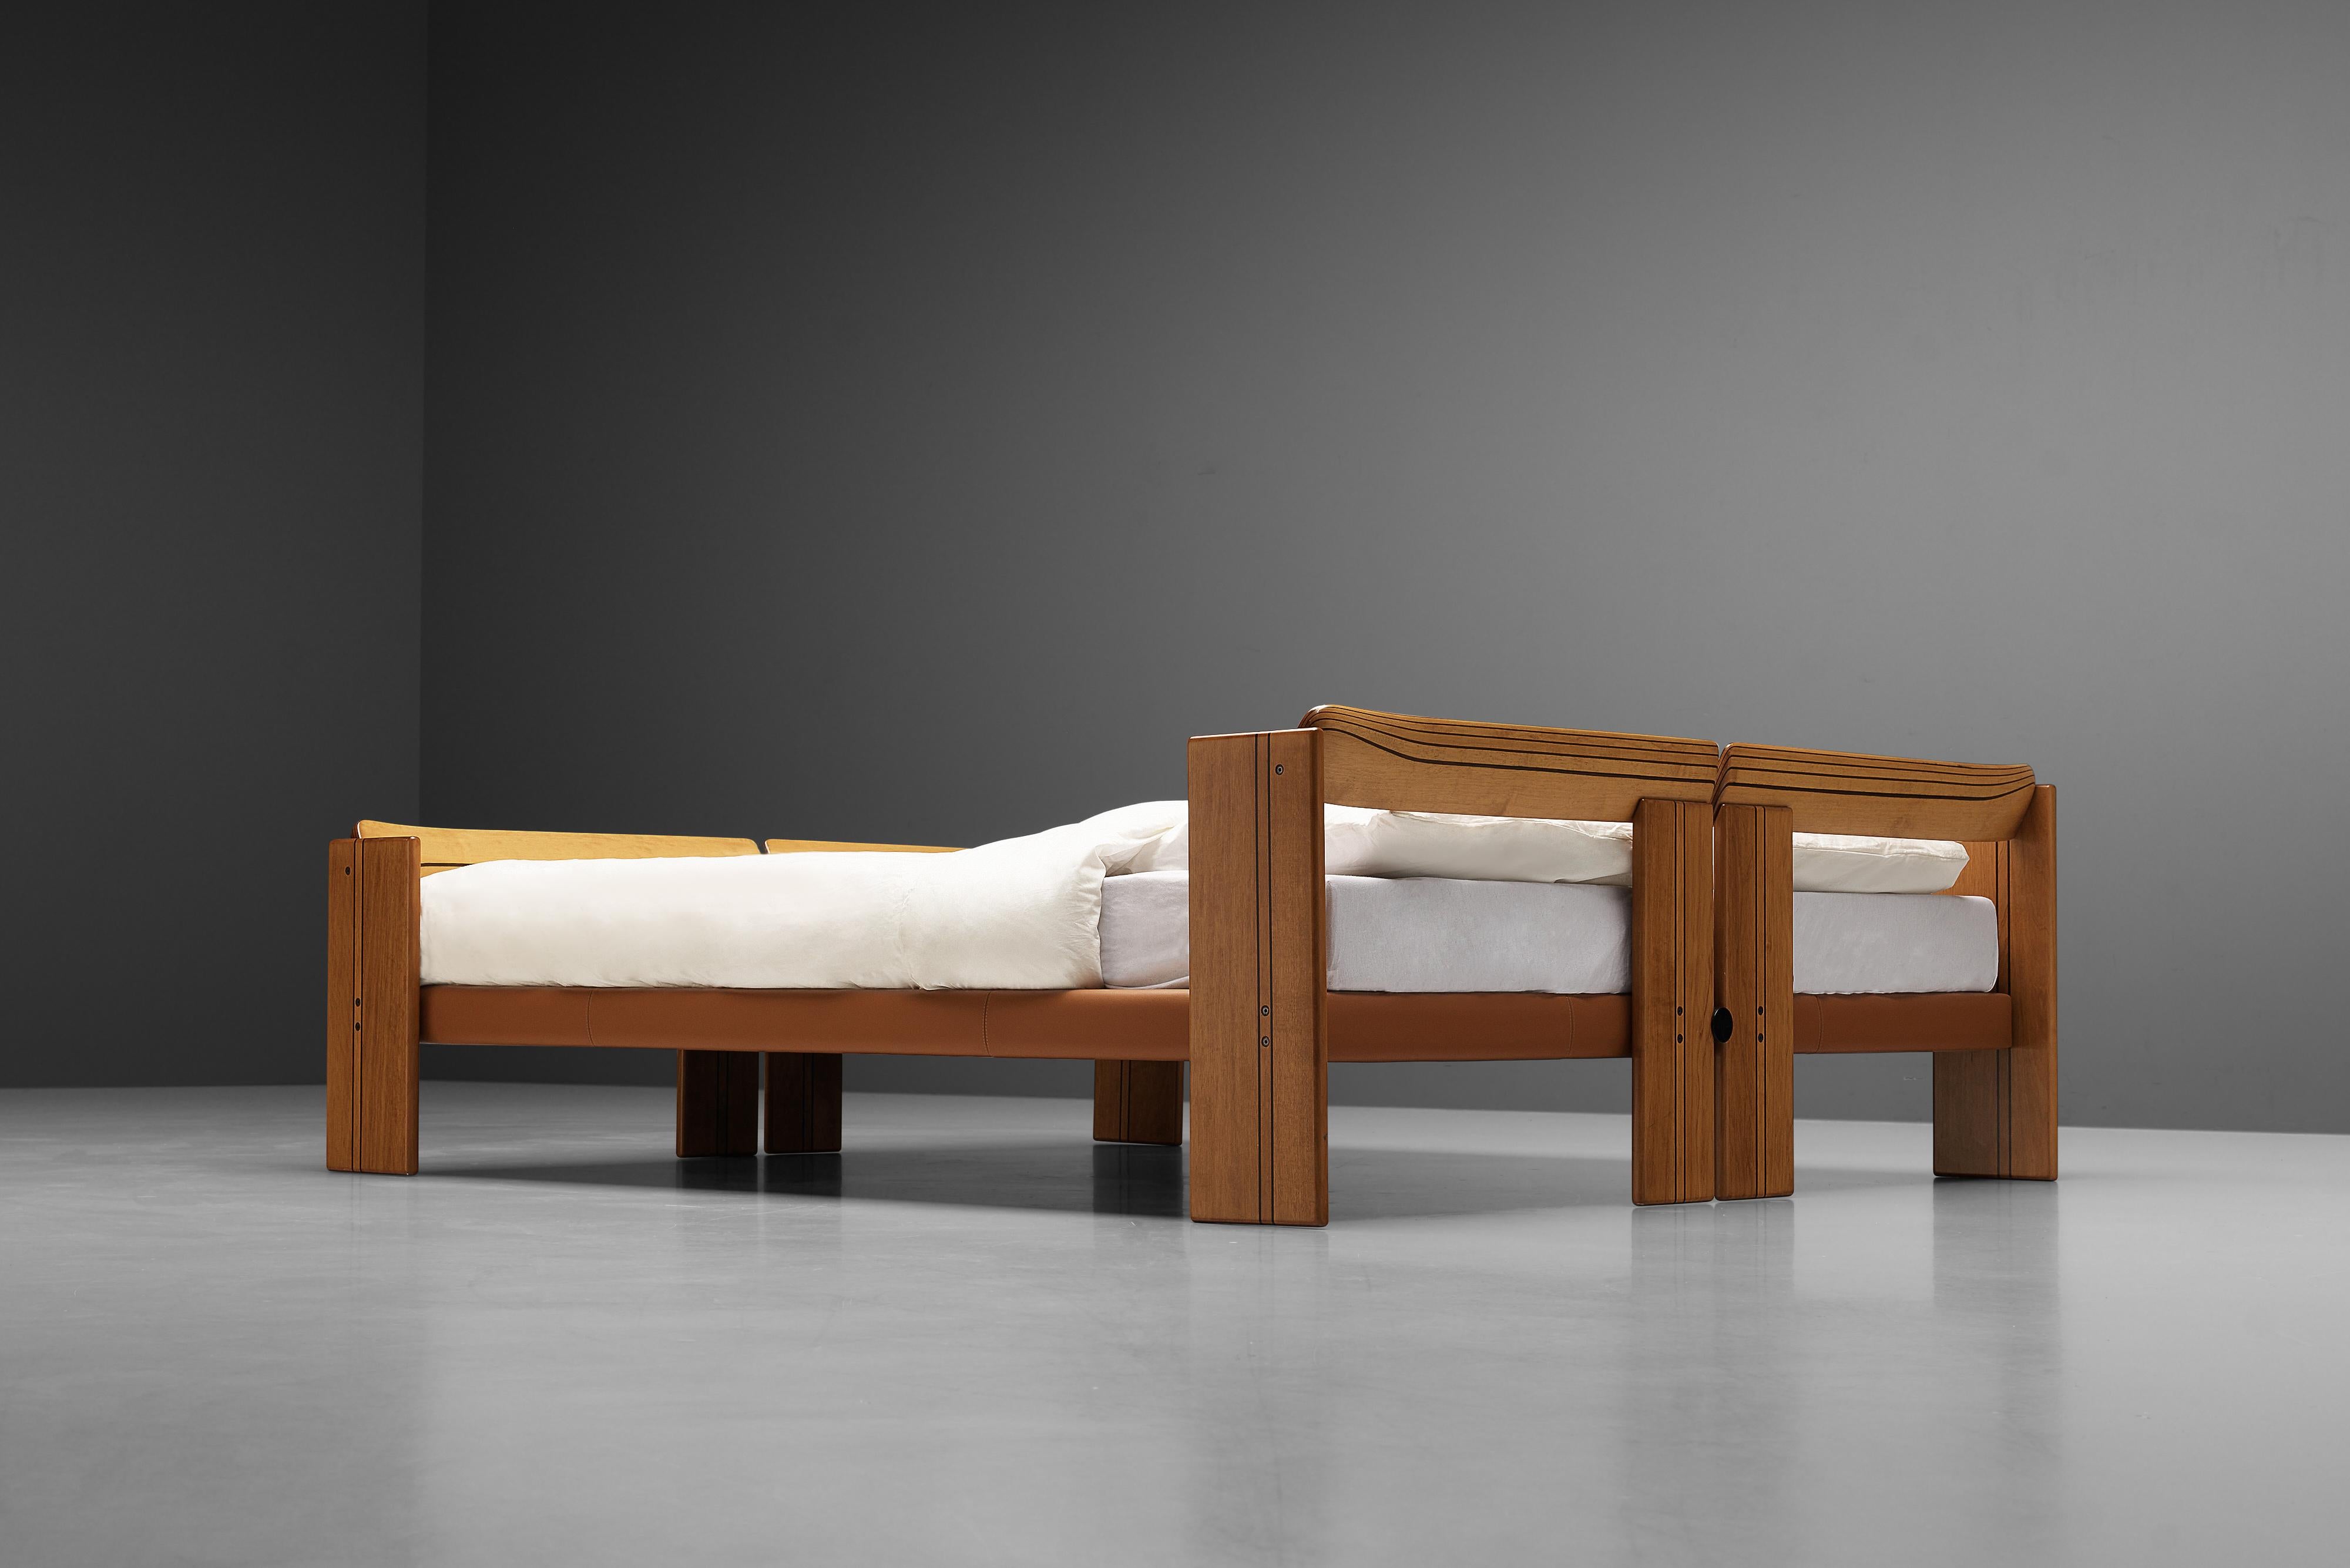 Afra & Tobia Scarpa 'Artona' Bed in Walnut and Leather 1